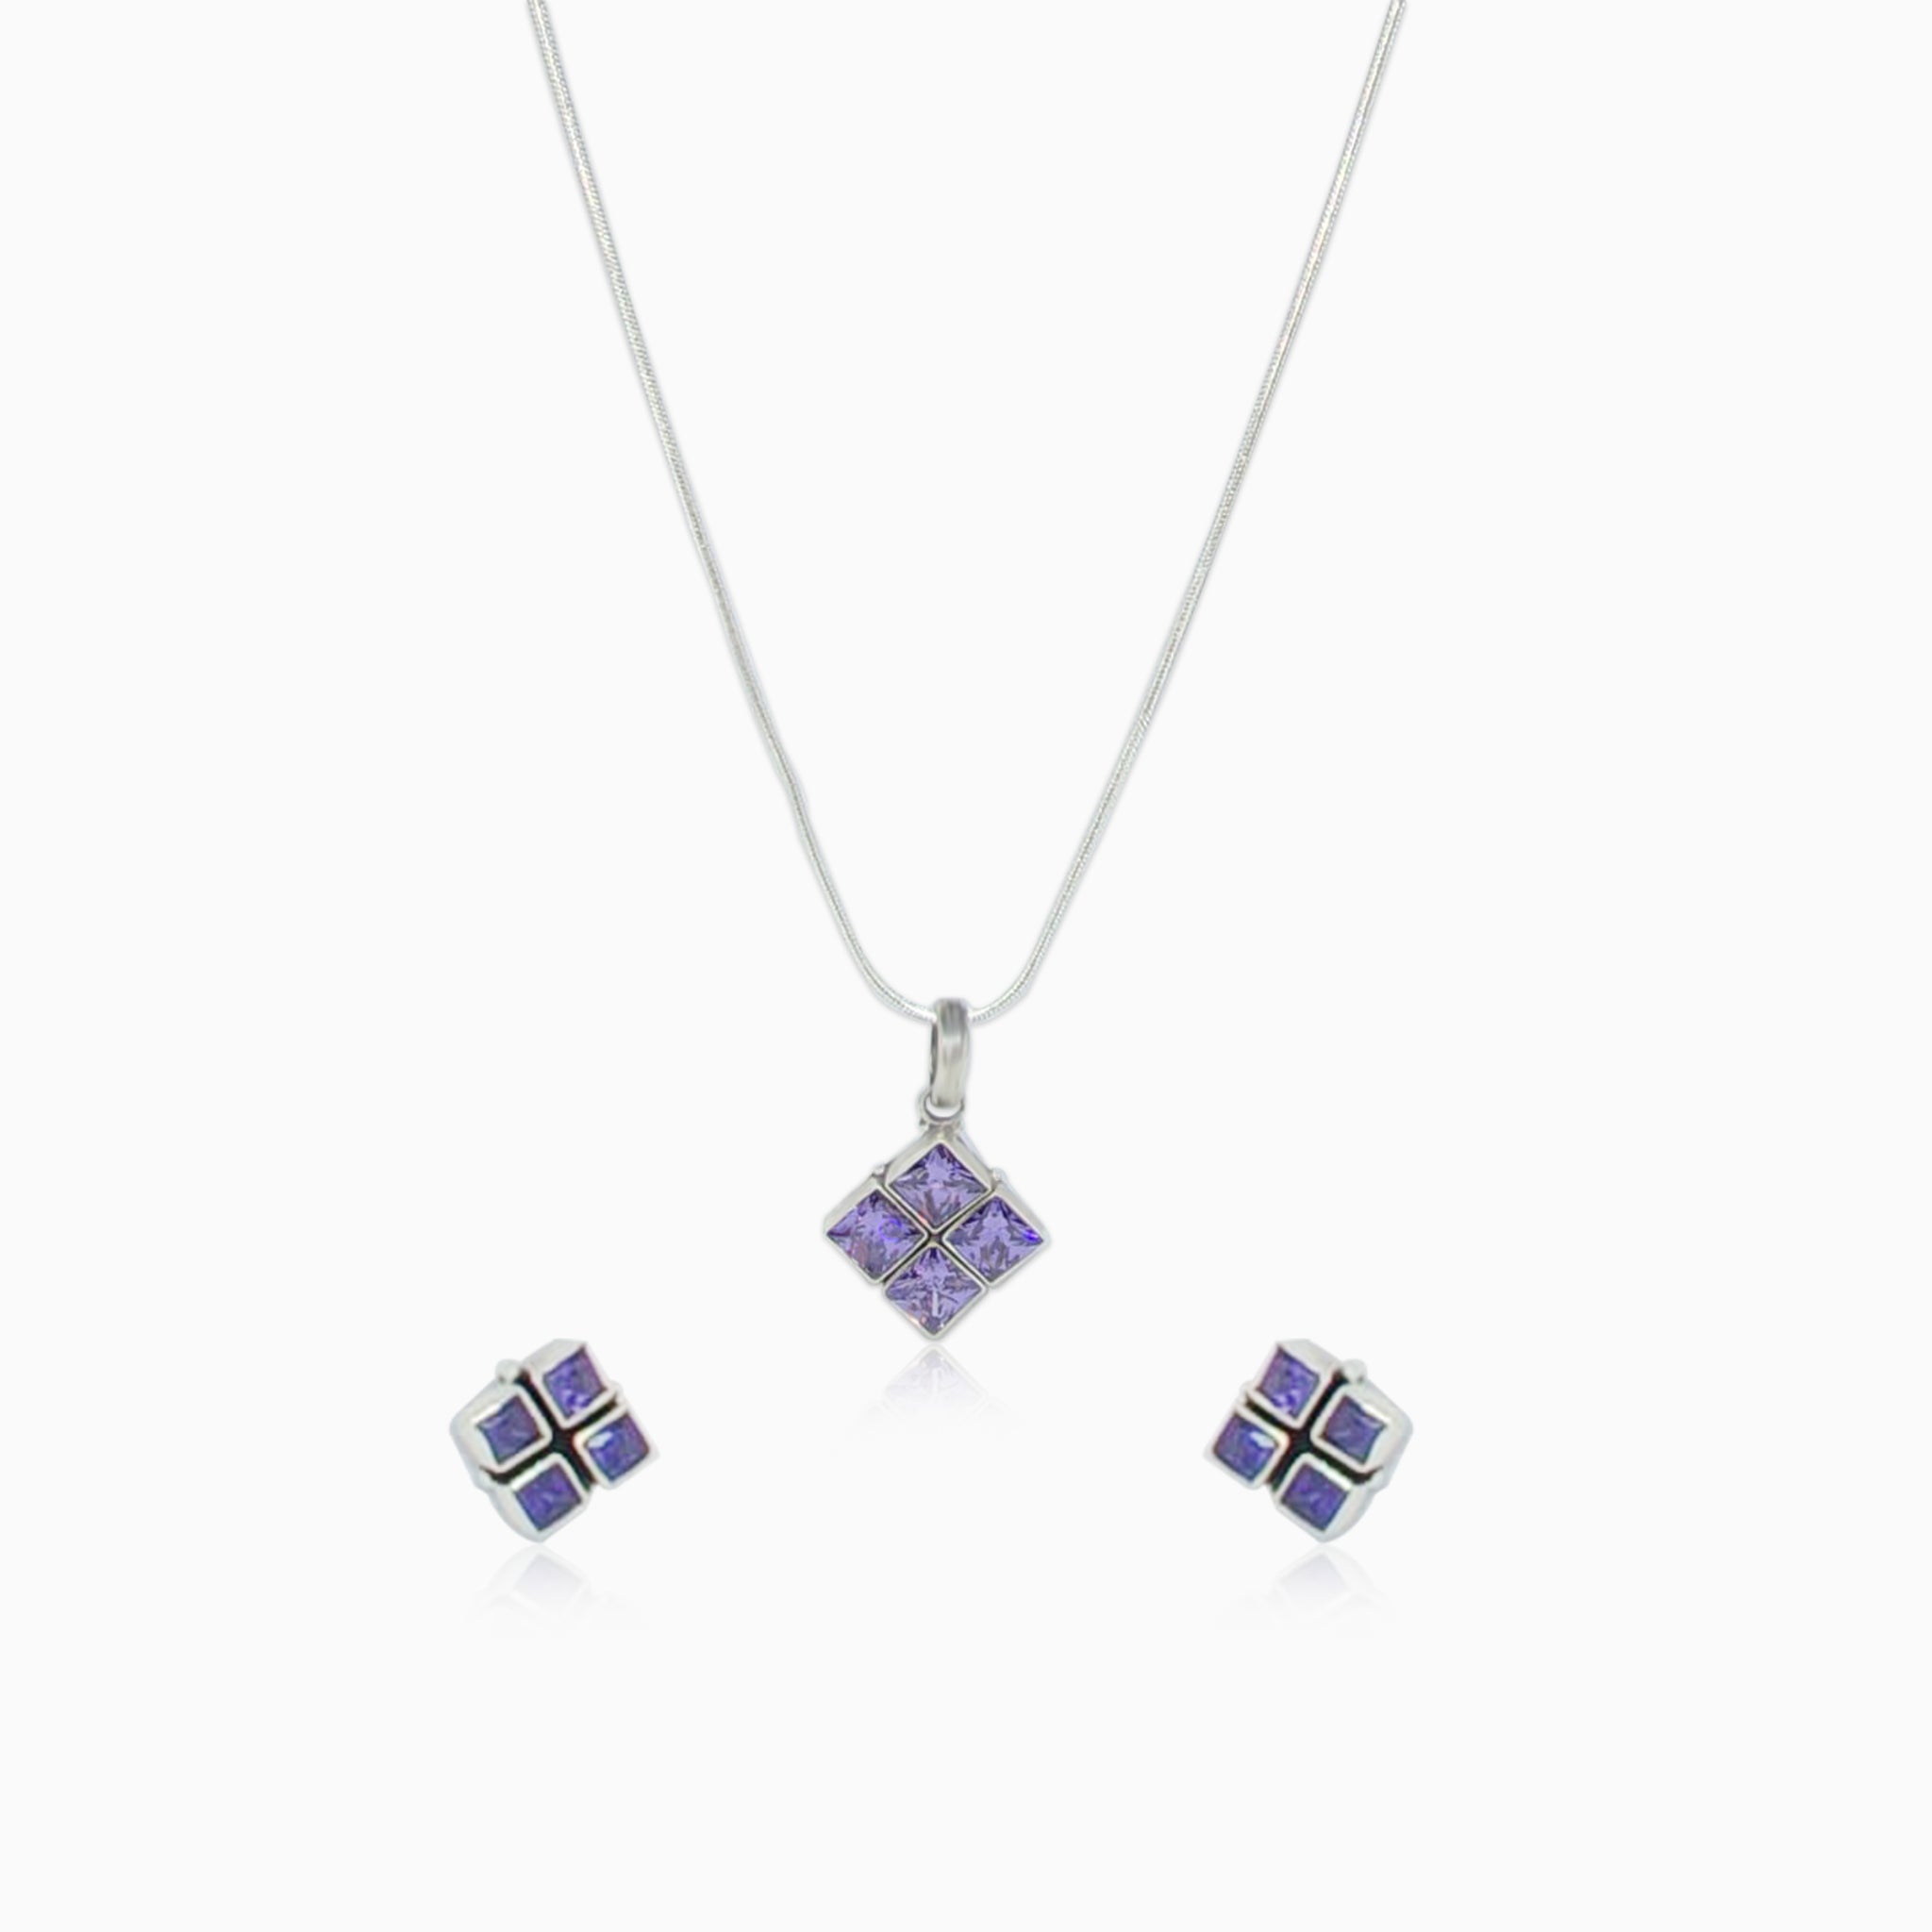 Silver Symmetrical Square Amethyst Pendant Set with Link Chain